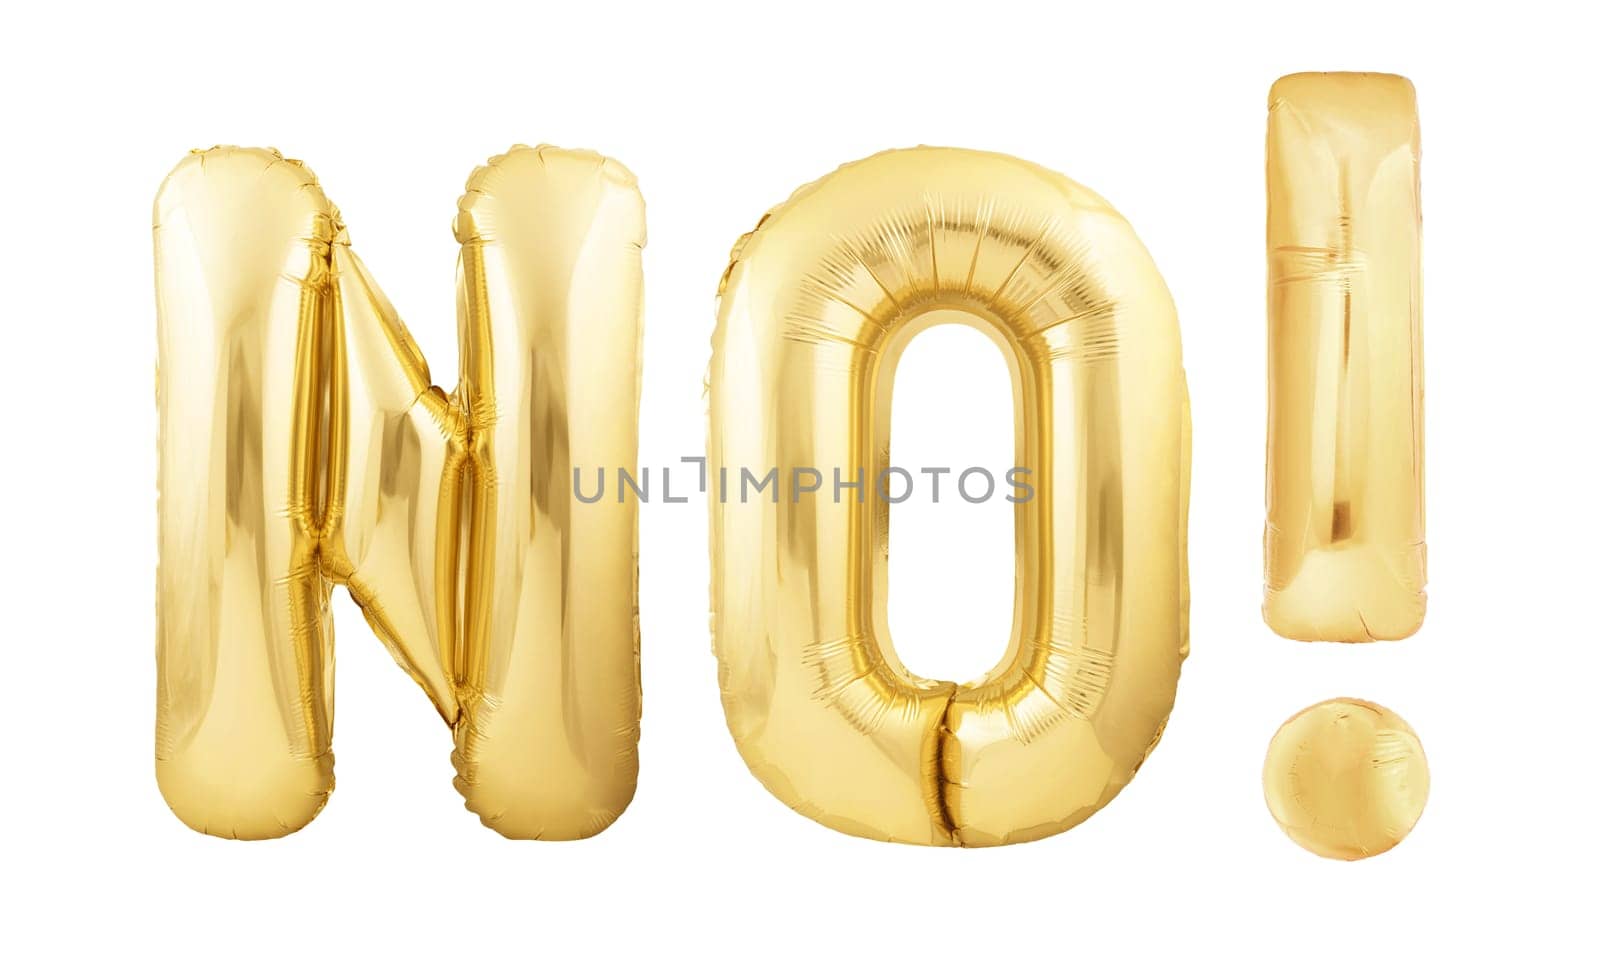 No! concept made of inflatable balloons isolated on white background by dmitryz